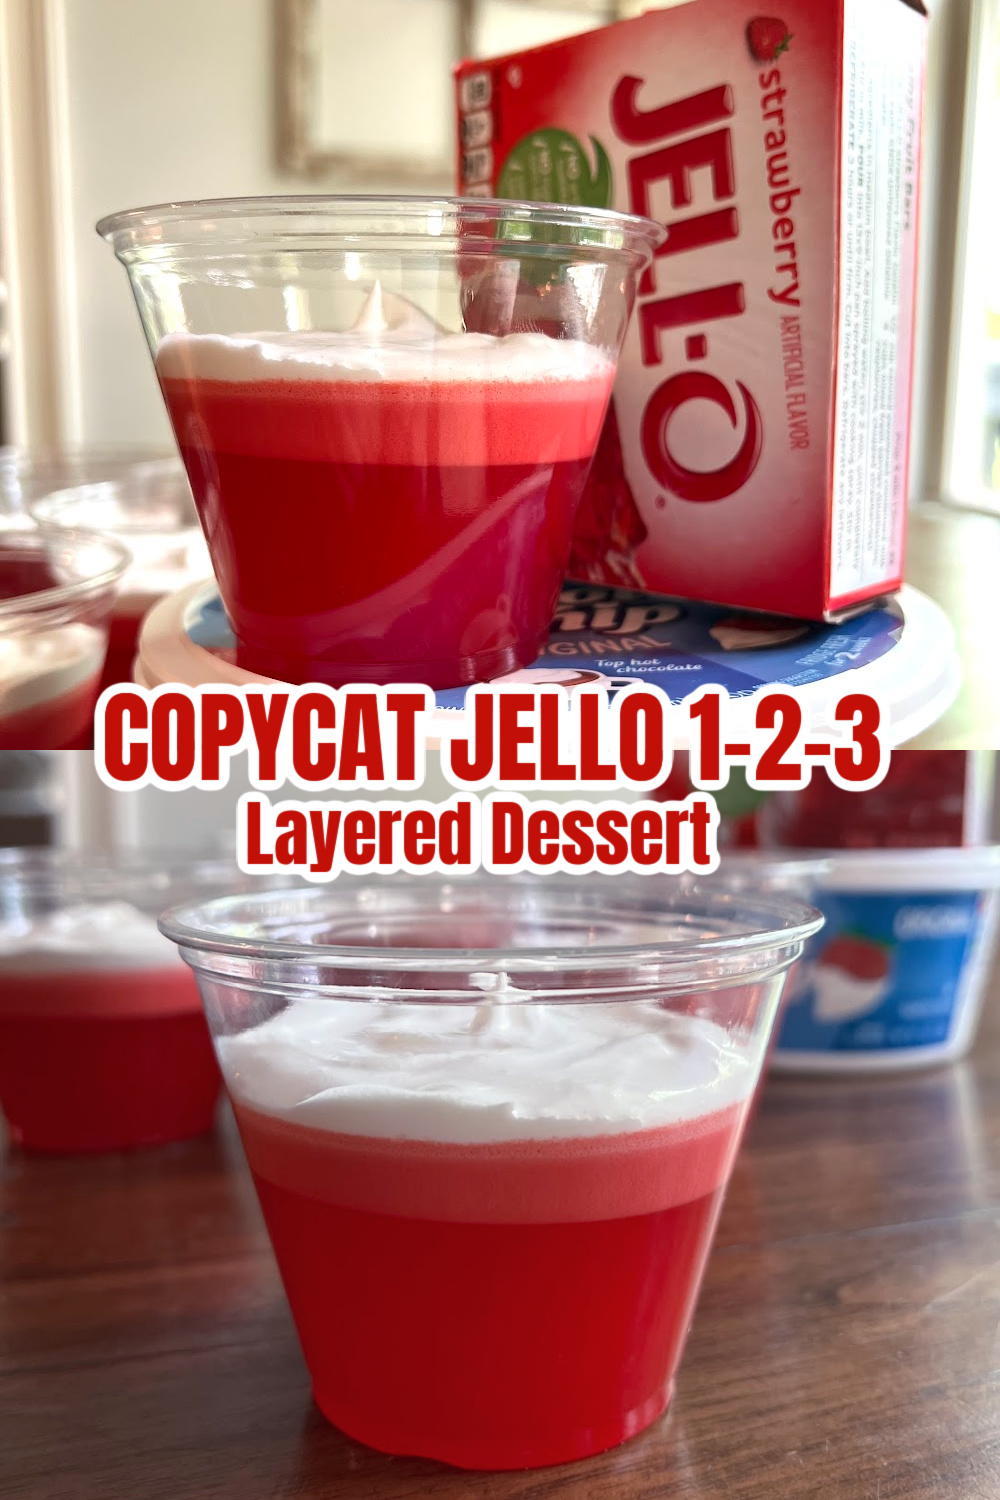 2 photo collage. Top photo is a clear up of jello 1 2 3 on top of a tub of cool whip next to a box of Strawberry Jello. Bottom photo is a photo of jello 1 2 3 in a clear cup.